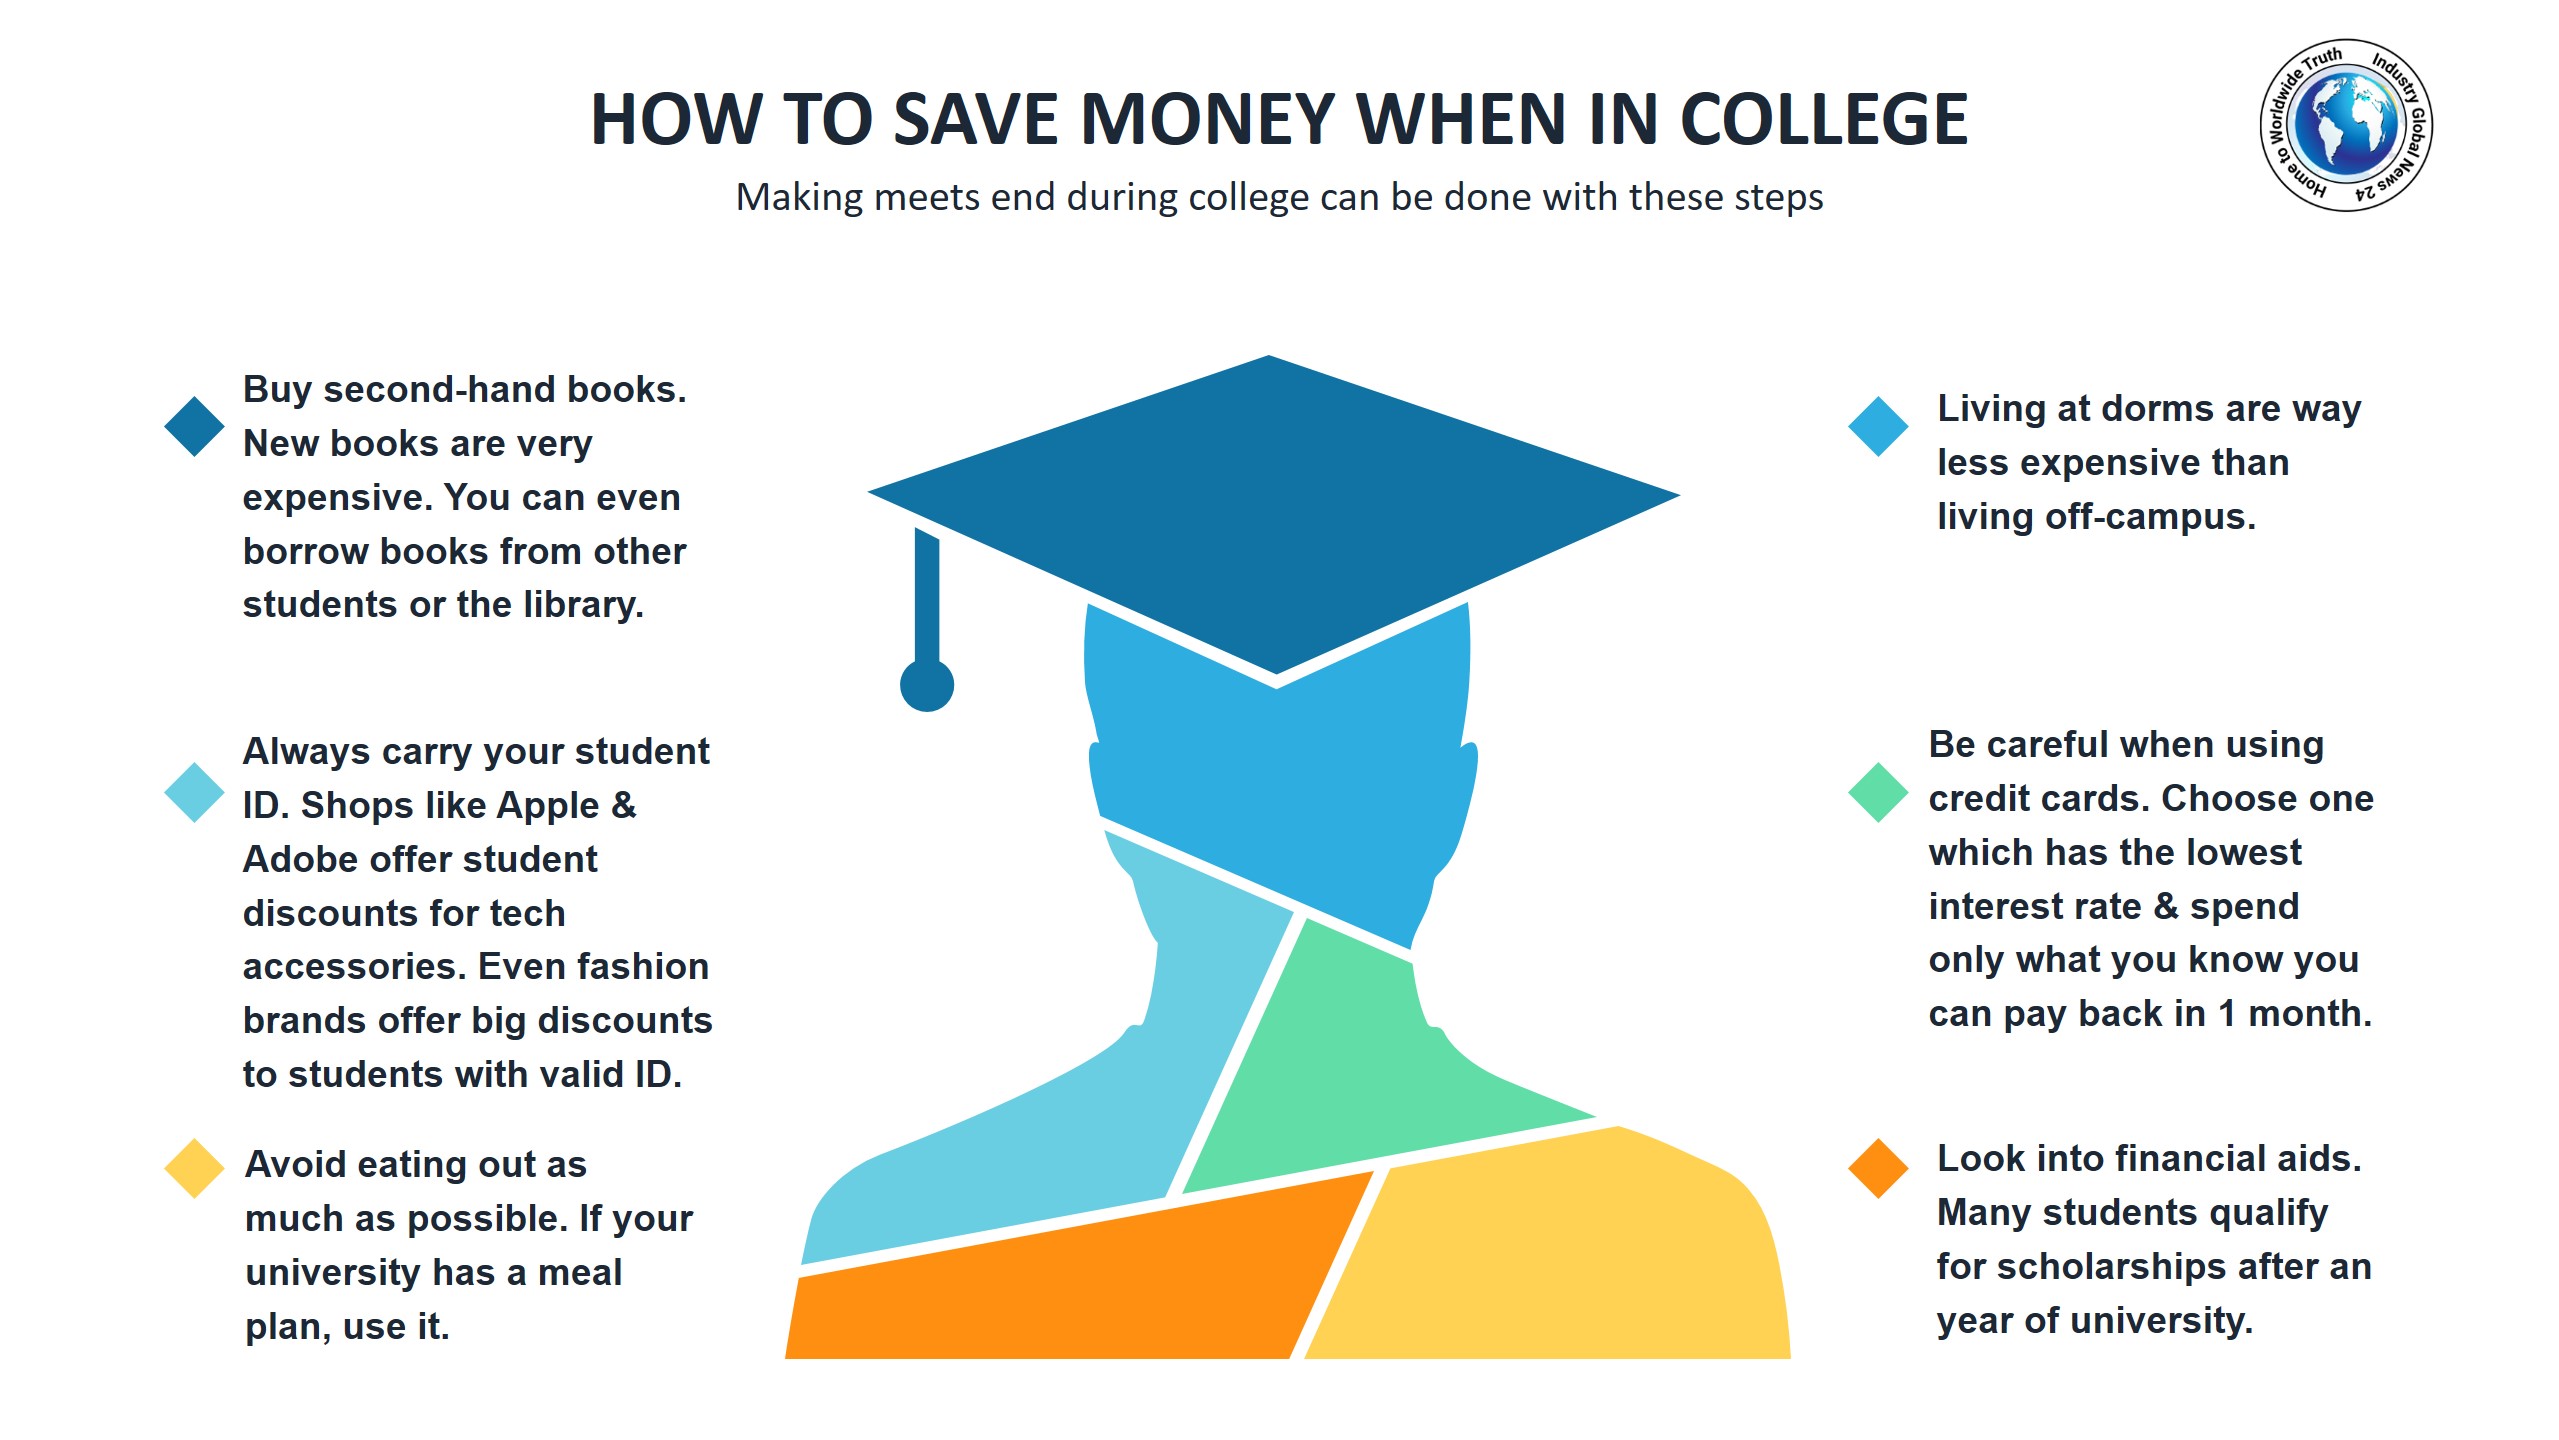 How to save money when in college